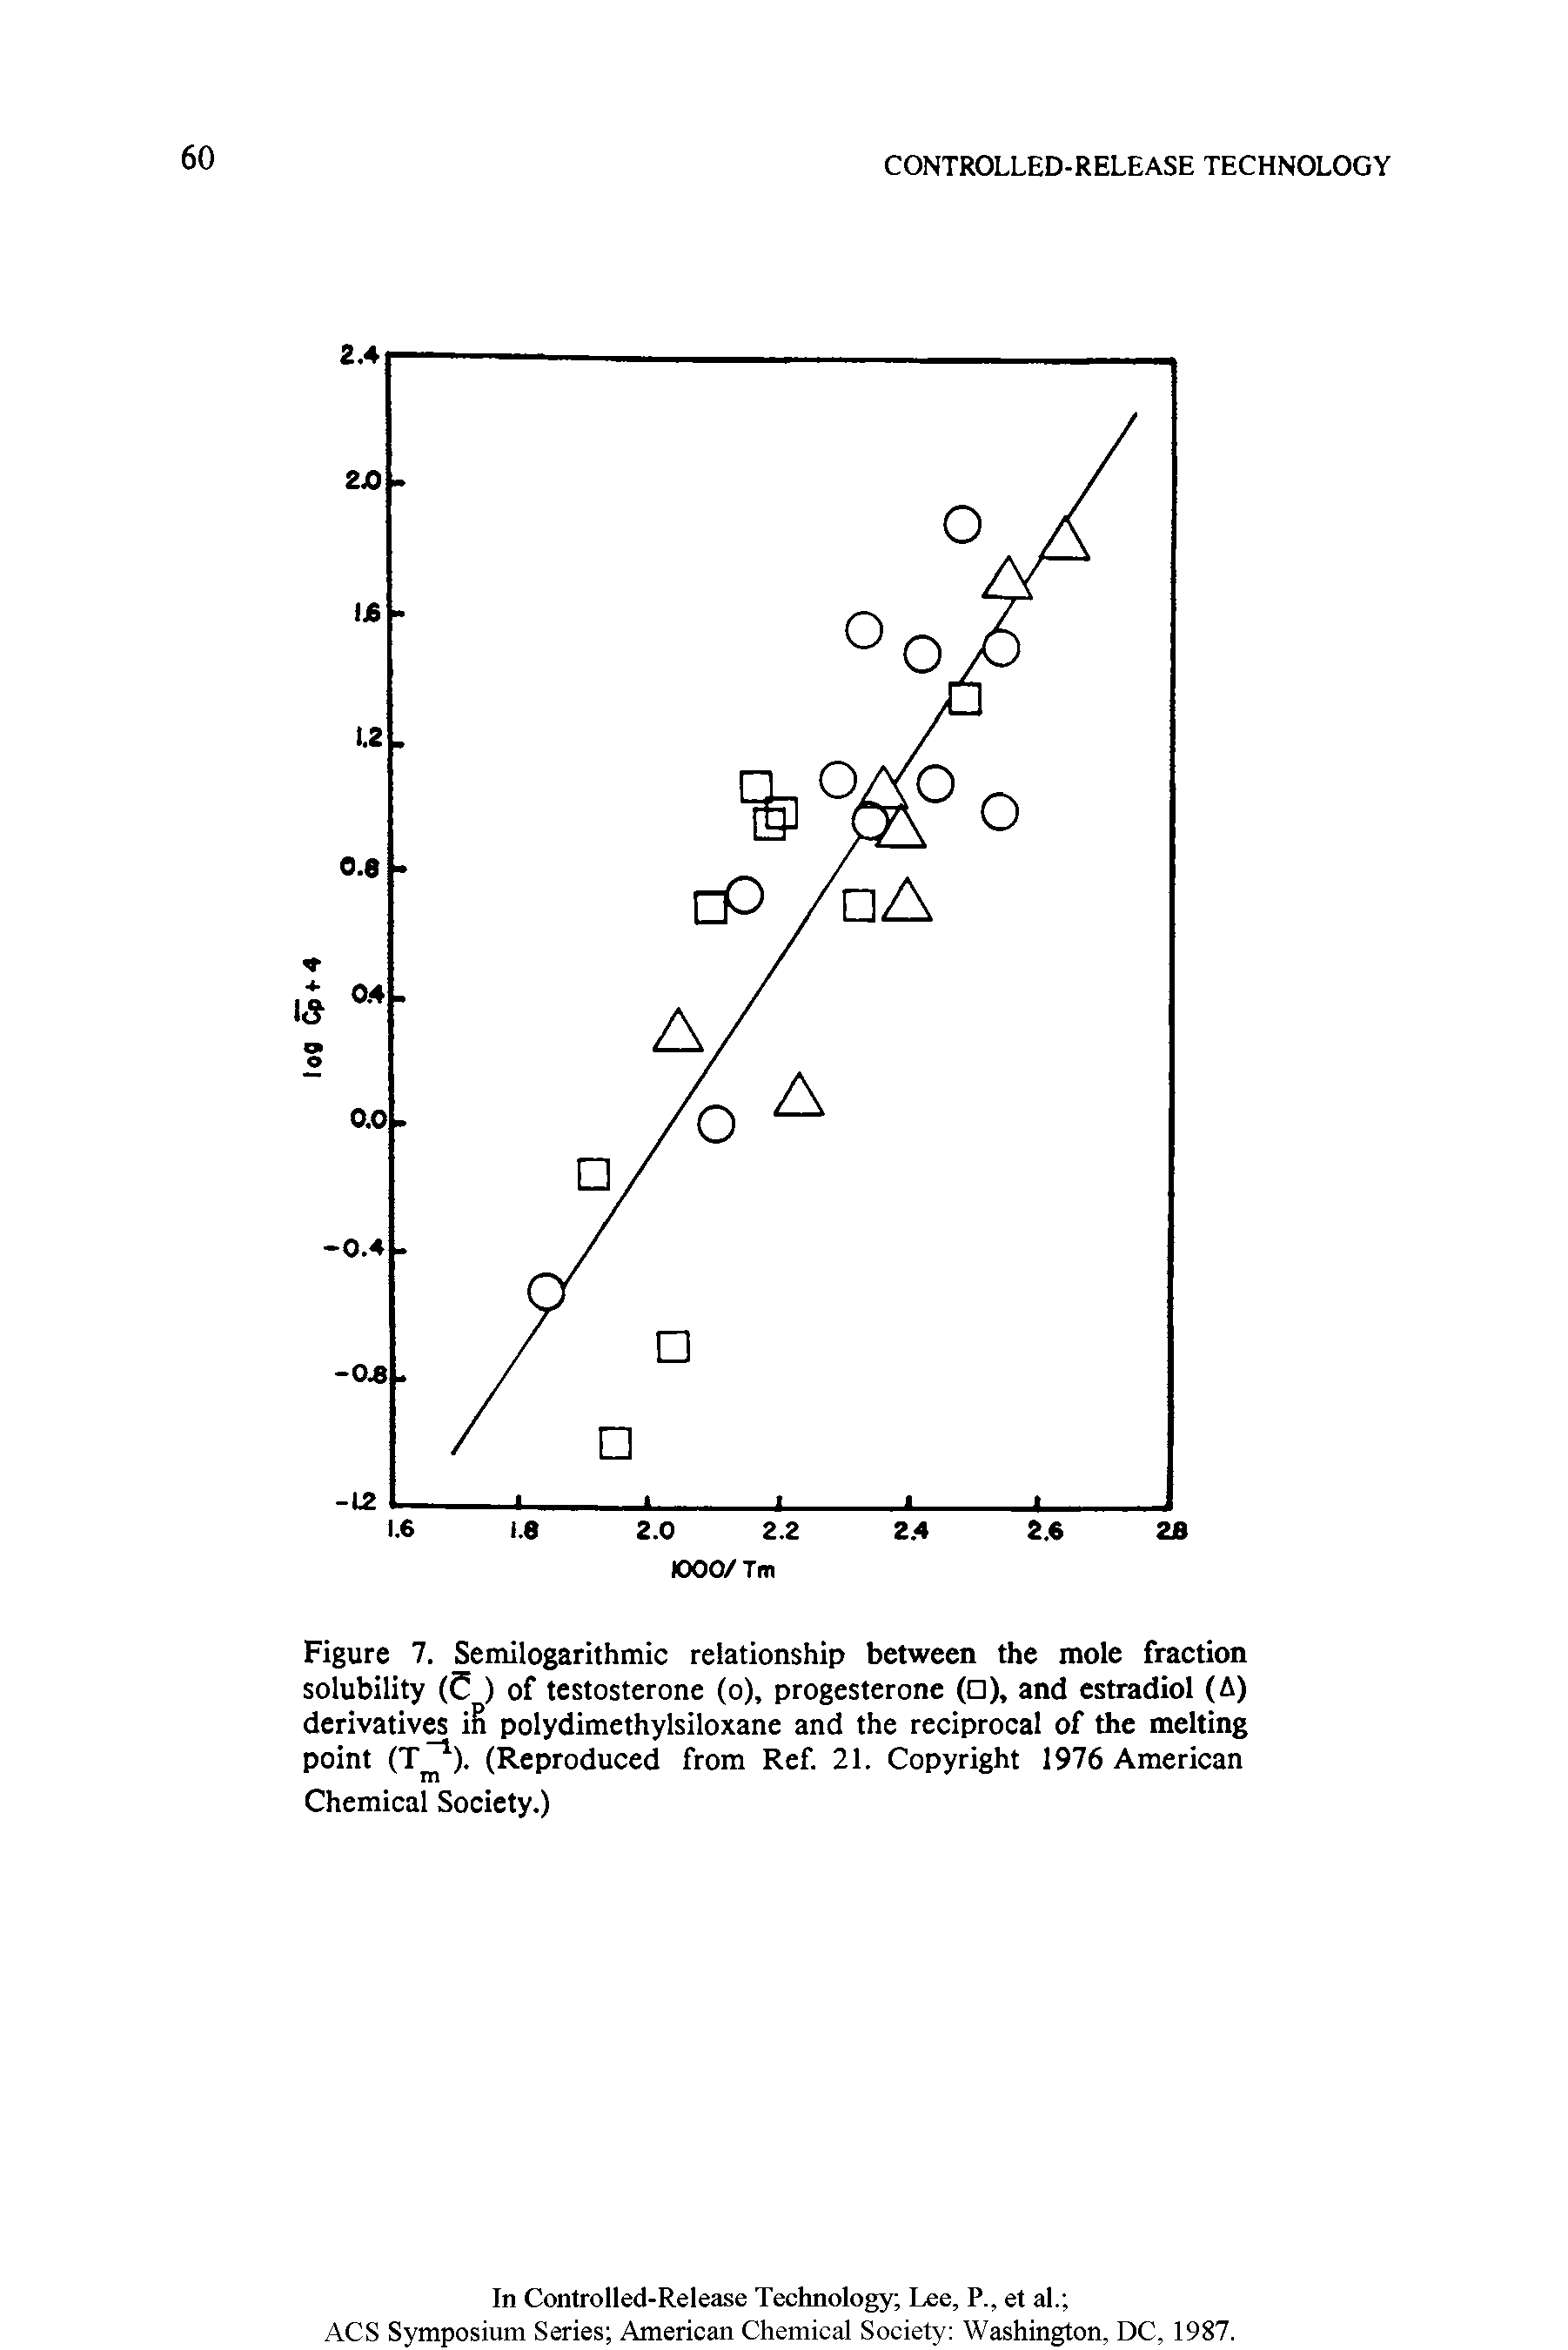 Figure 7. Semilogarithmic relationship between the mole fraction solubility ( ) of testosterone (o), progesterone ( ), and estradiol (A) derivatives in polydimethylsiloxane and the reciprocal of the melting point (T 1). (Reproduced from Ref. 21. Copyright 1976 American Chemical Society.)...